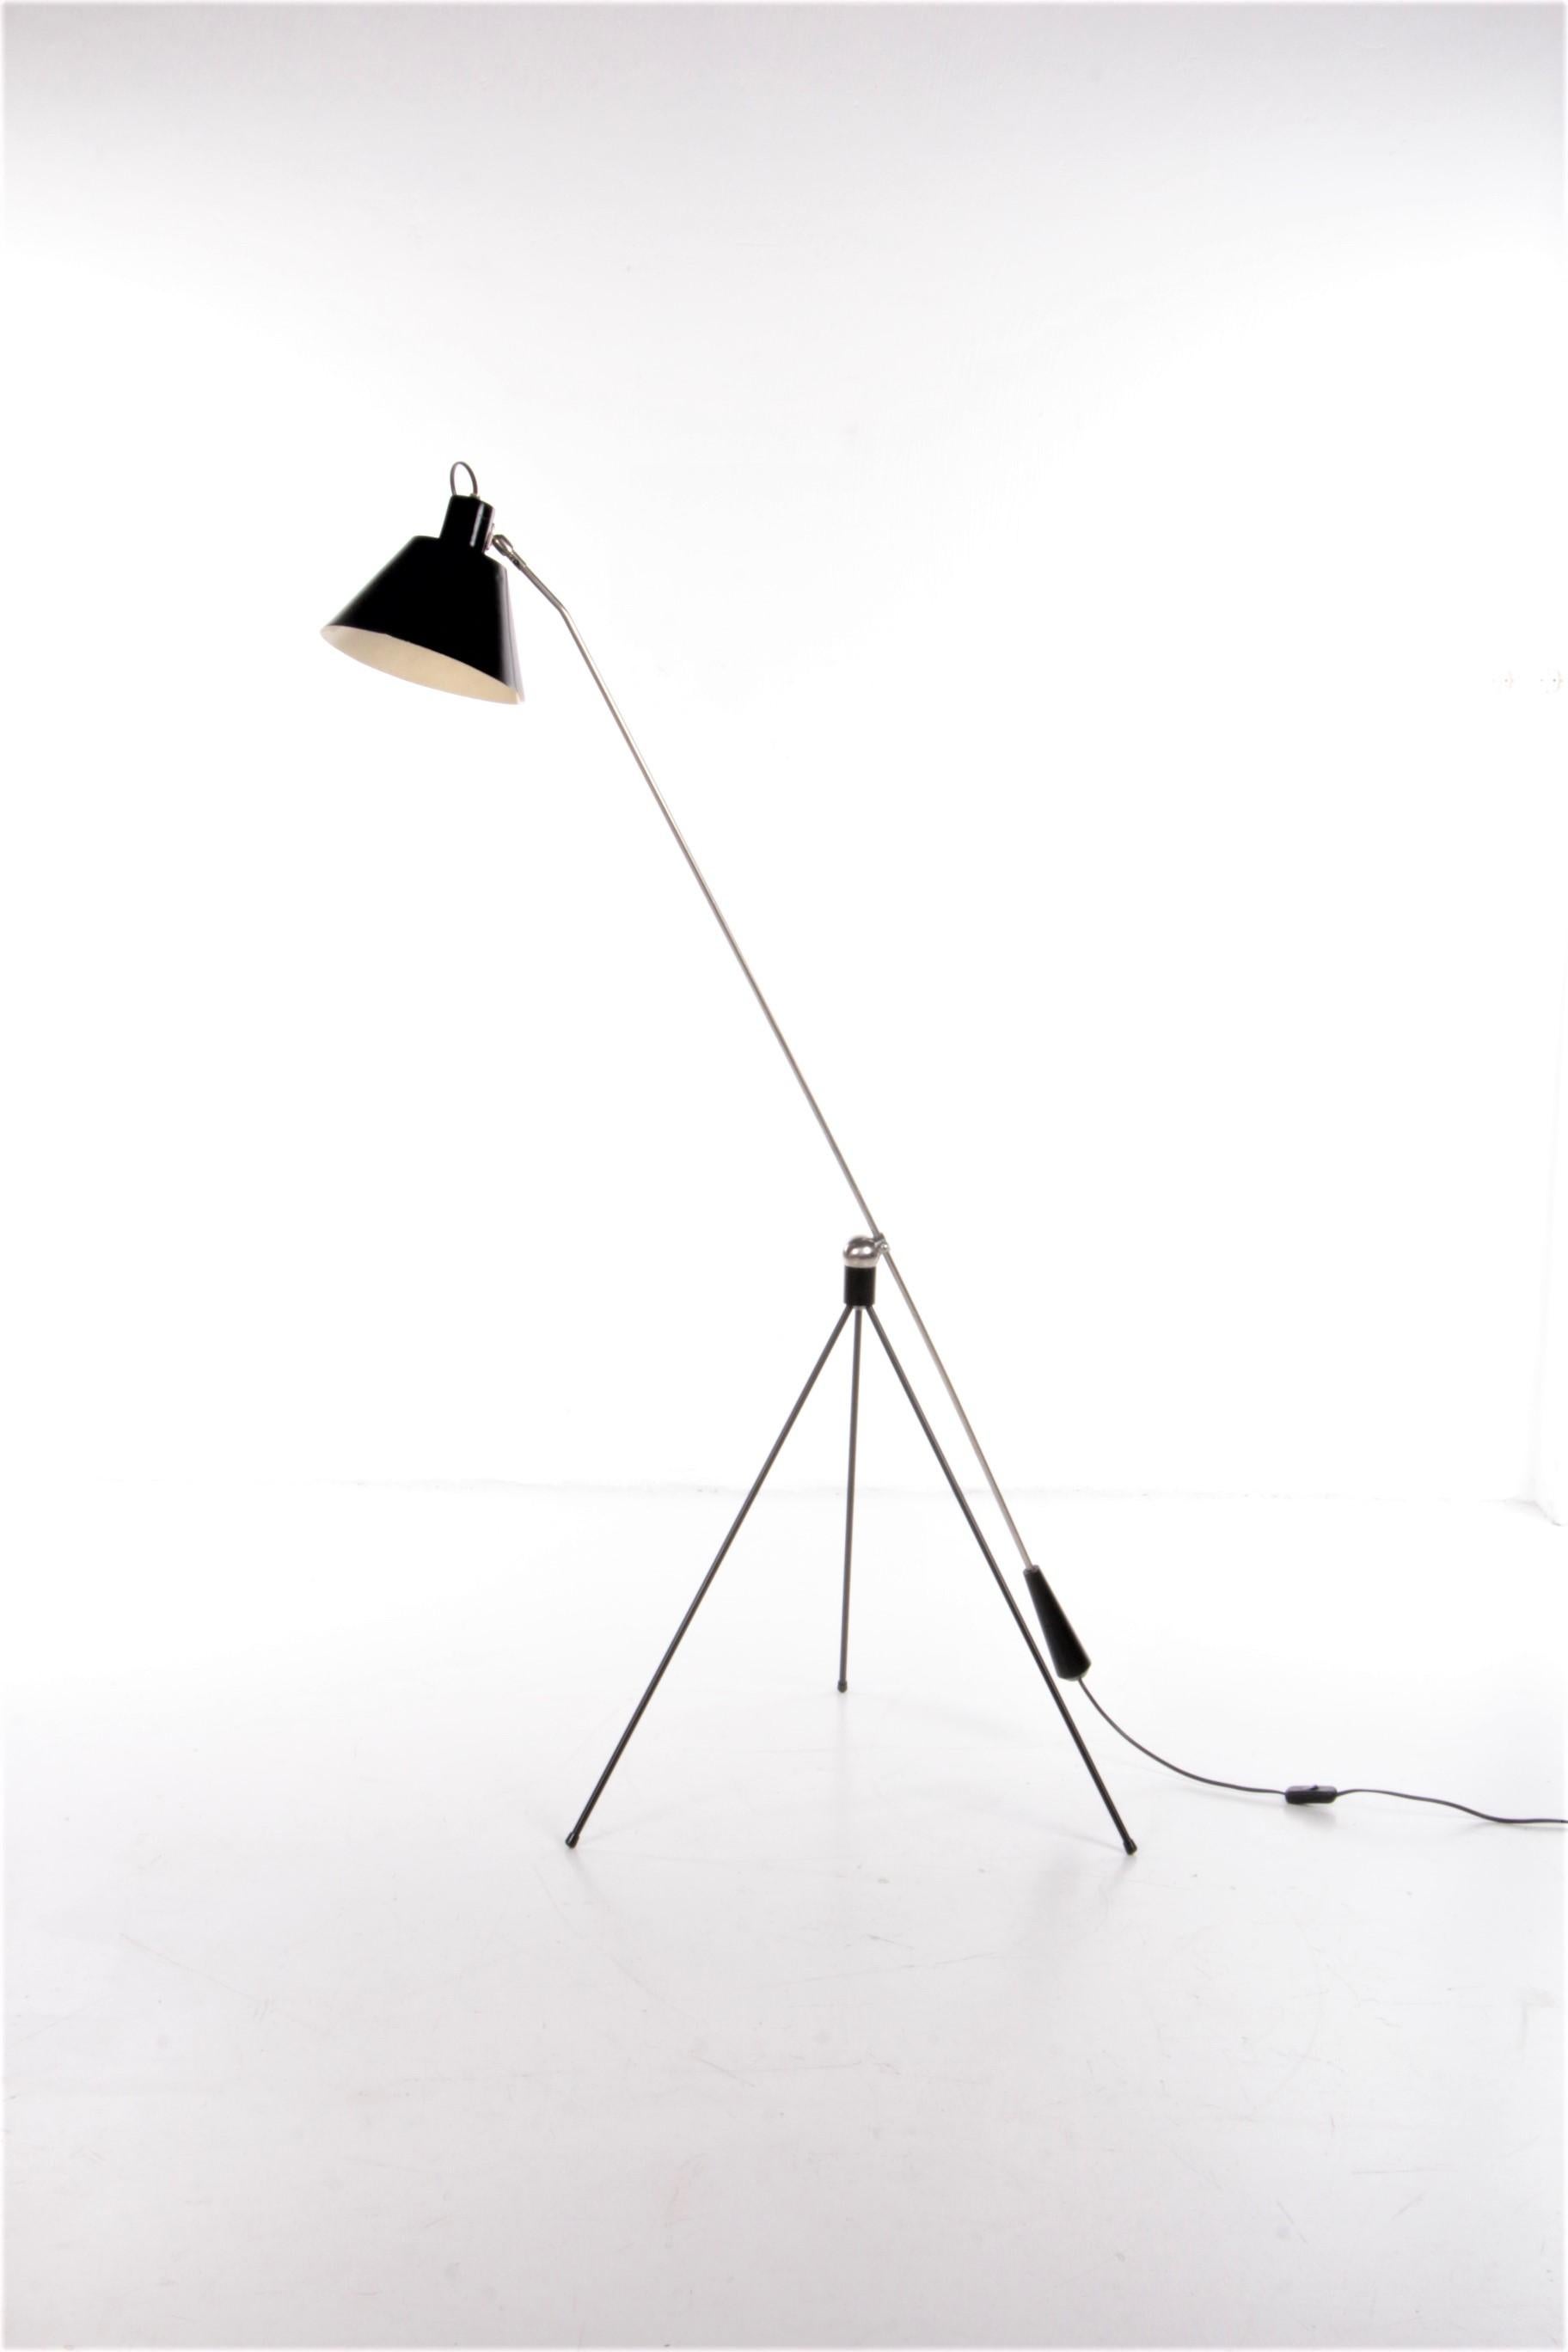 Artiforte Magneto floor lamp design by H. Fillekes 1950s Netherlands


Very rare floor lamp, from the Dutch brand Artiforte, not to be confused with the furniture brand Artifort.
This lamp has only been in production for a very short time and